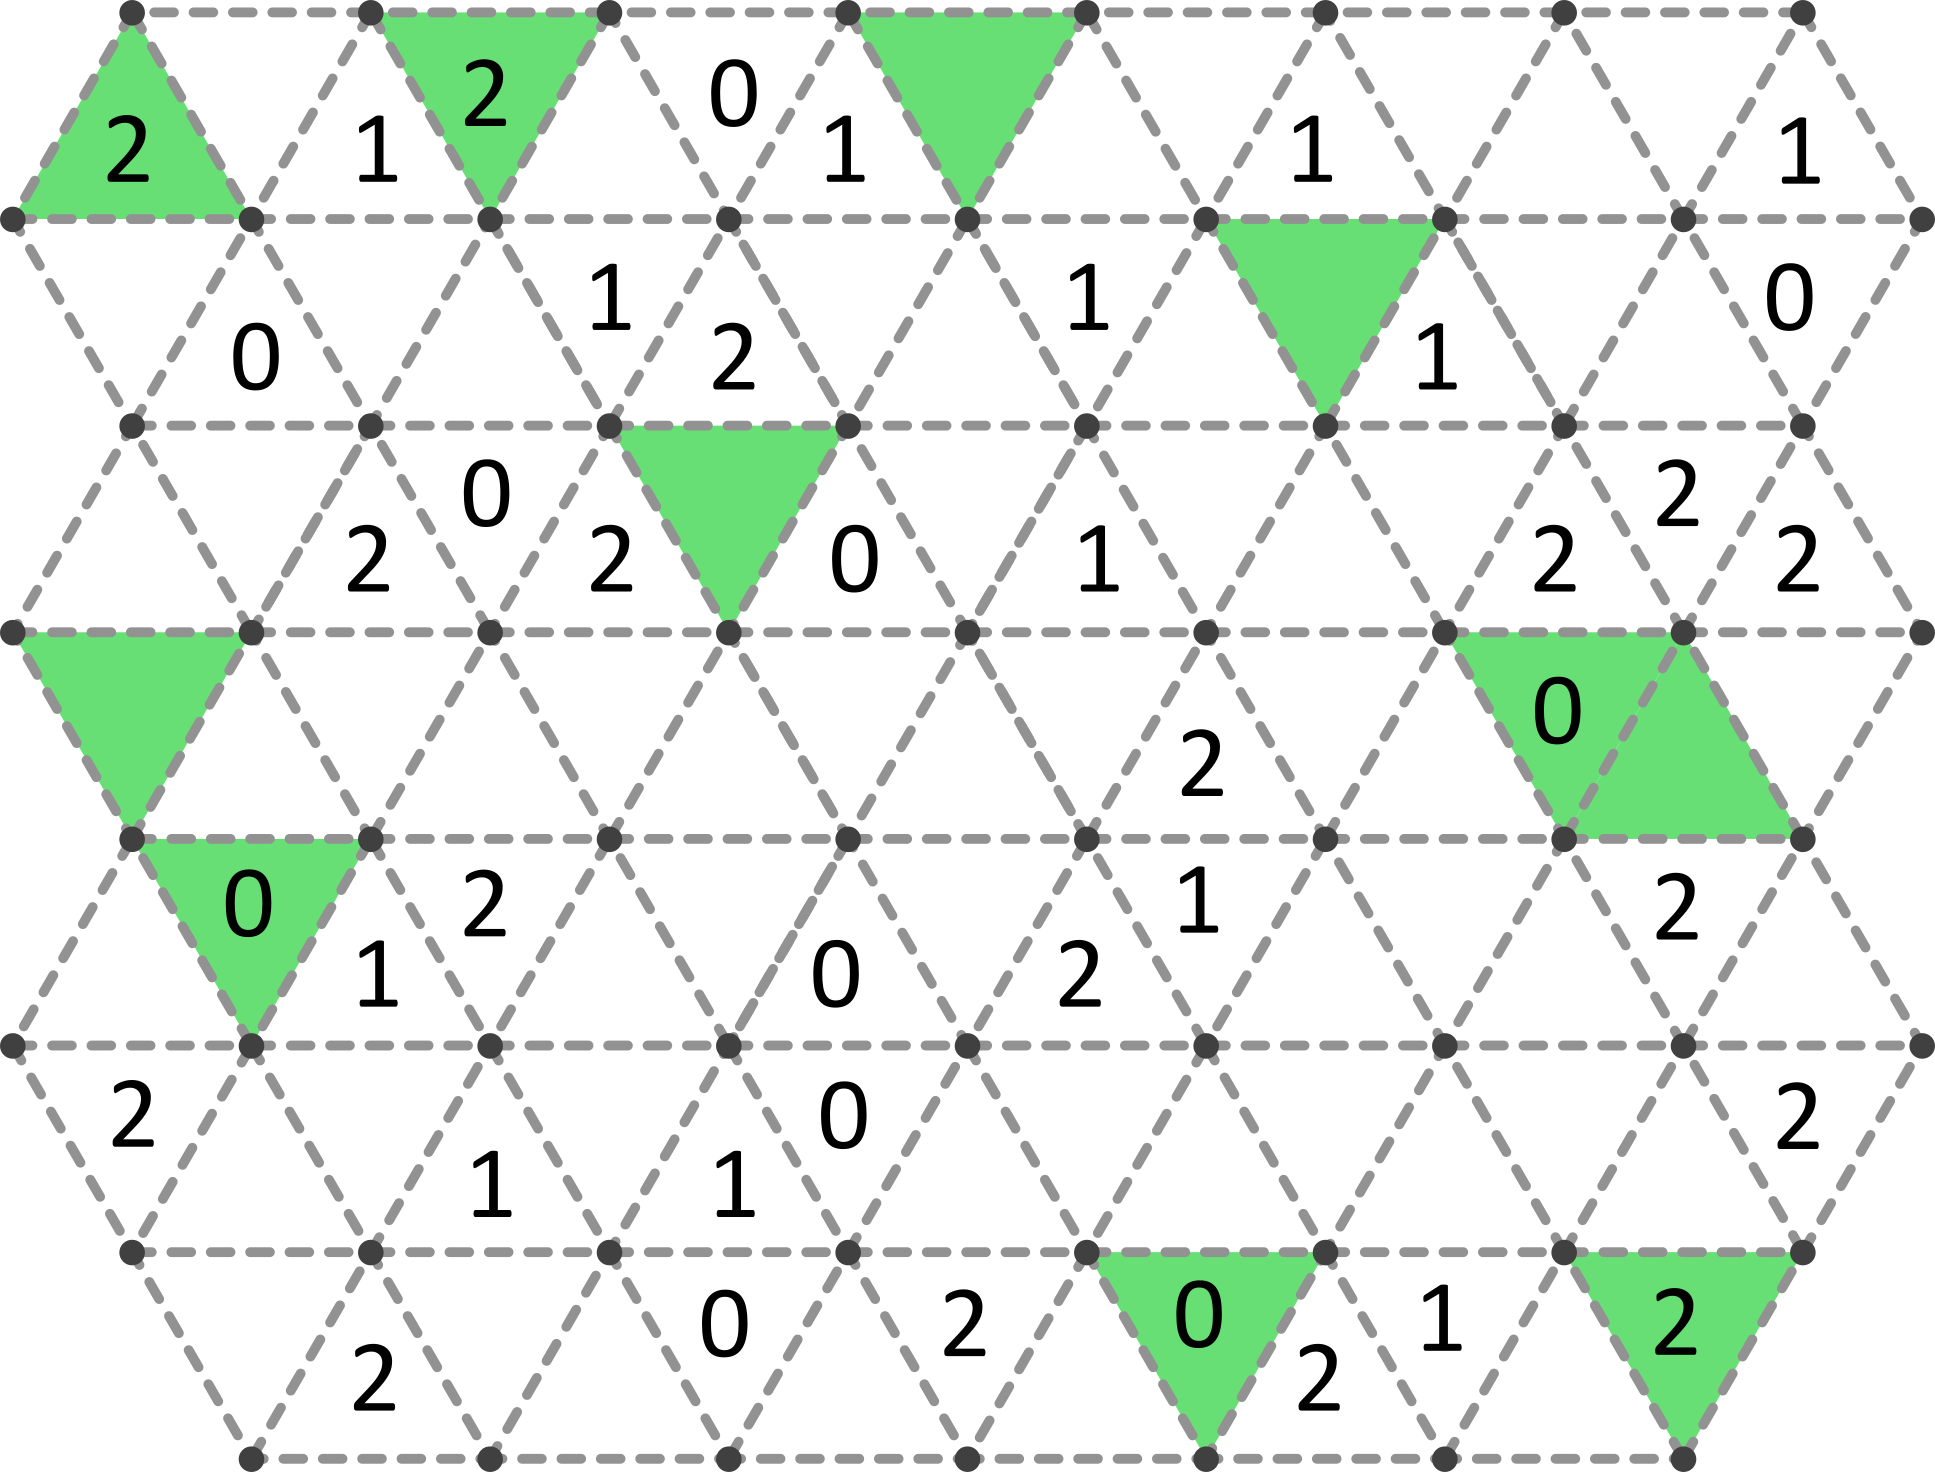 A slitherlink on a triangular grid with some highlighted triangles.